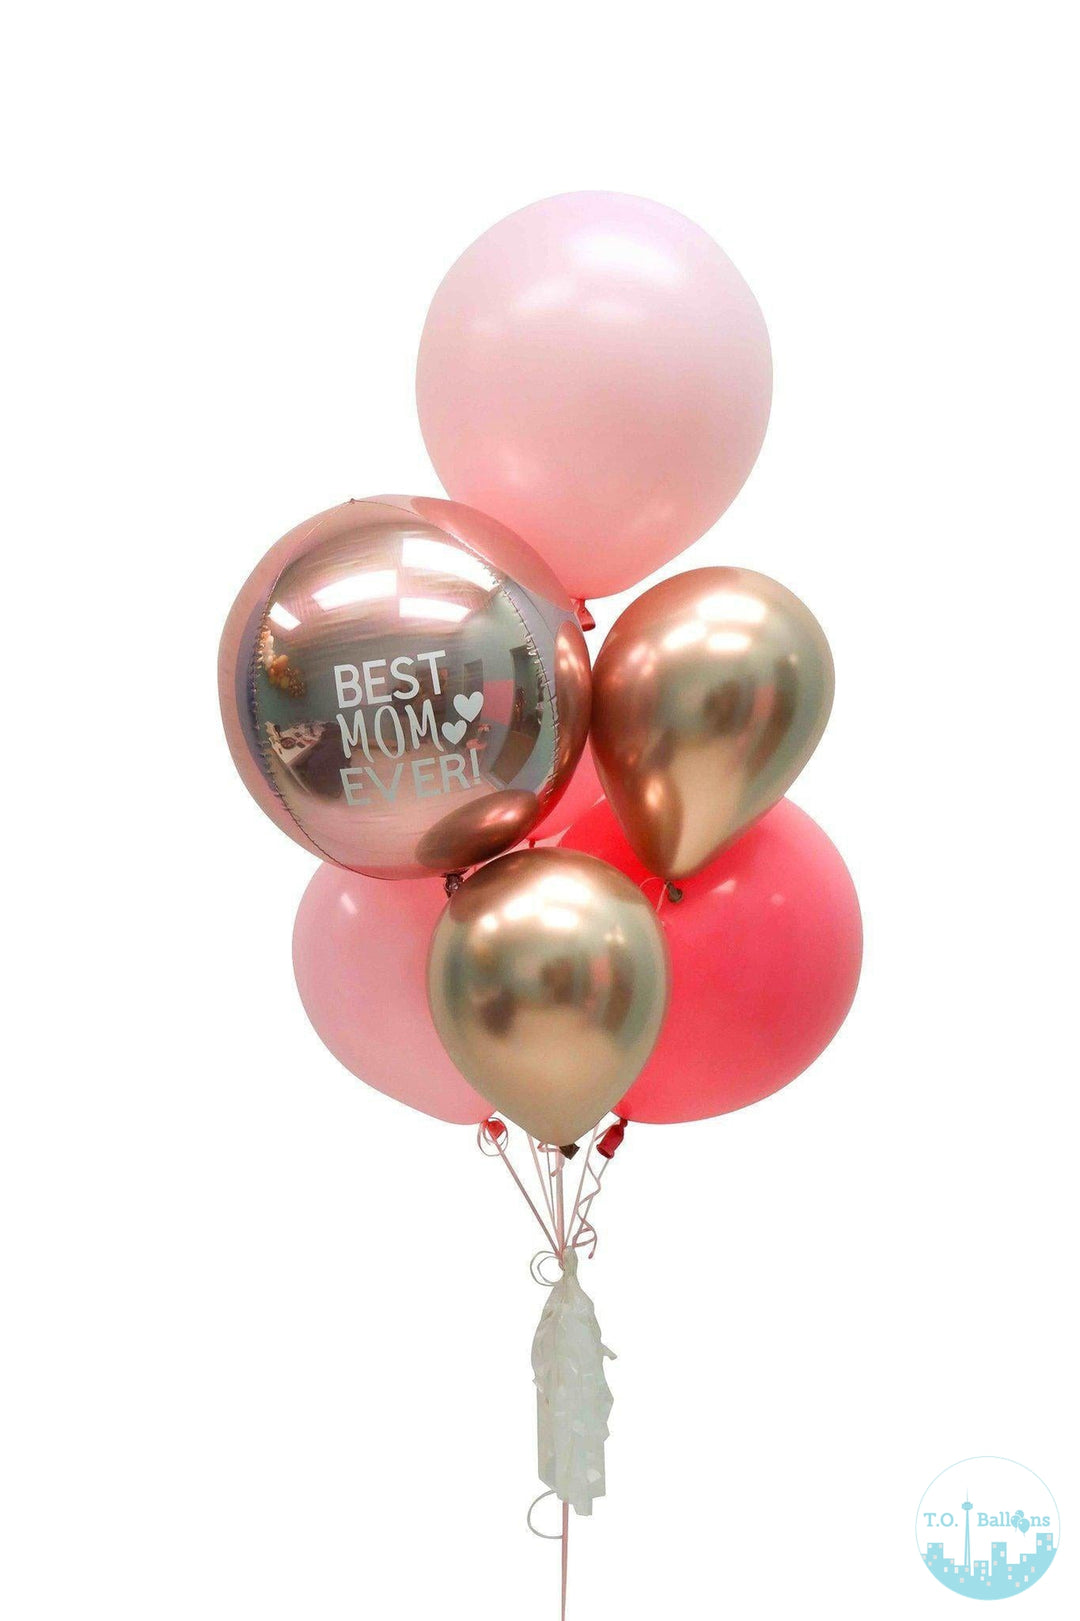 Mothers Day Bouquet Balloons T.O. Balloons 